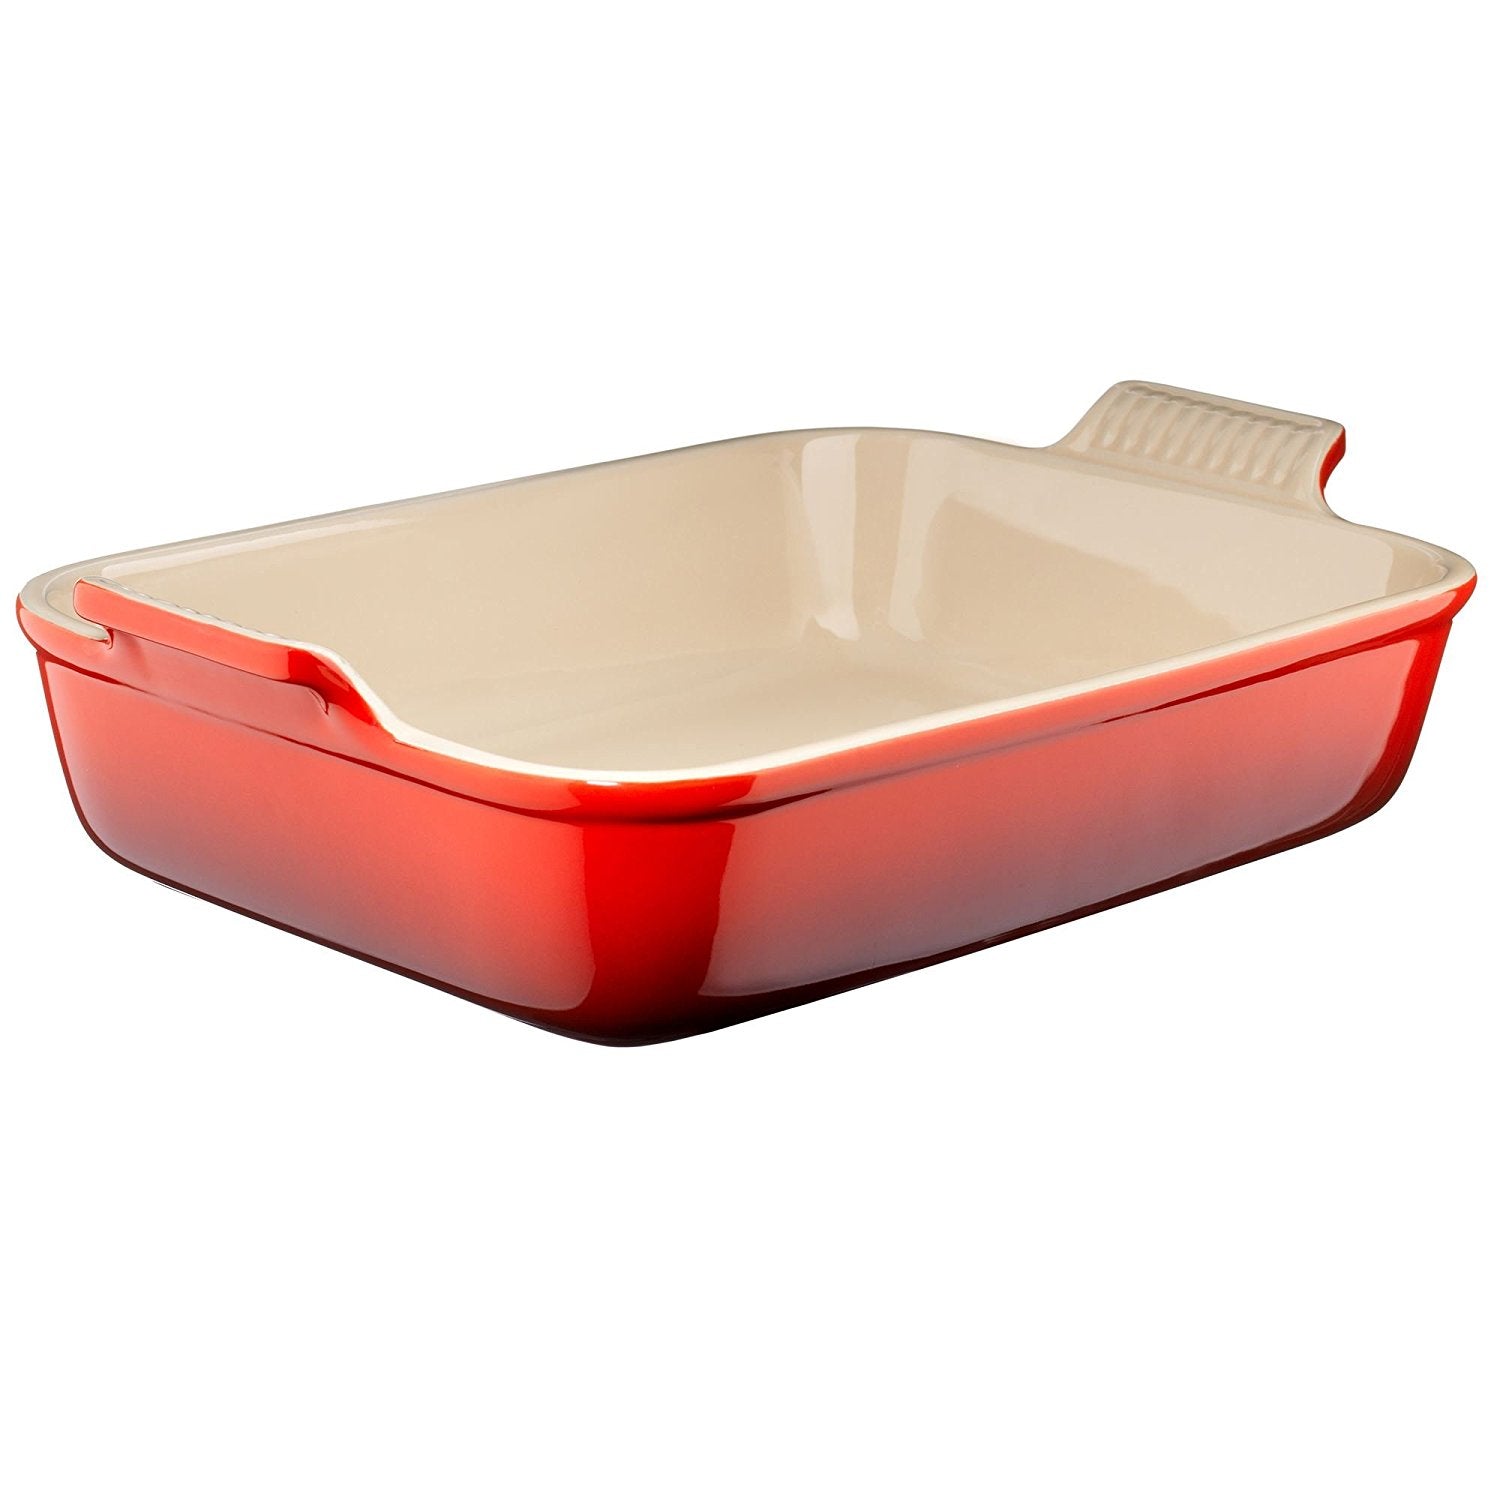 Le Creuset Covered Rectangular Cerise Red Ceramic Baking Dish with